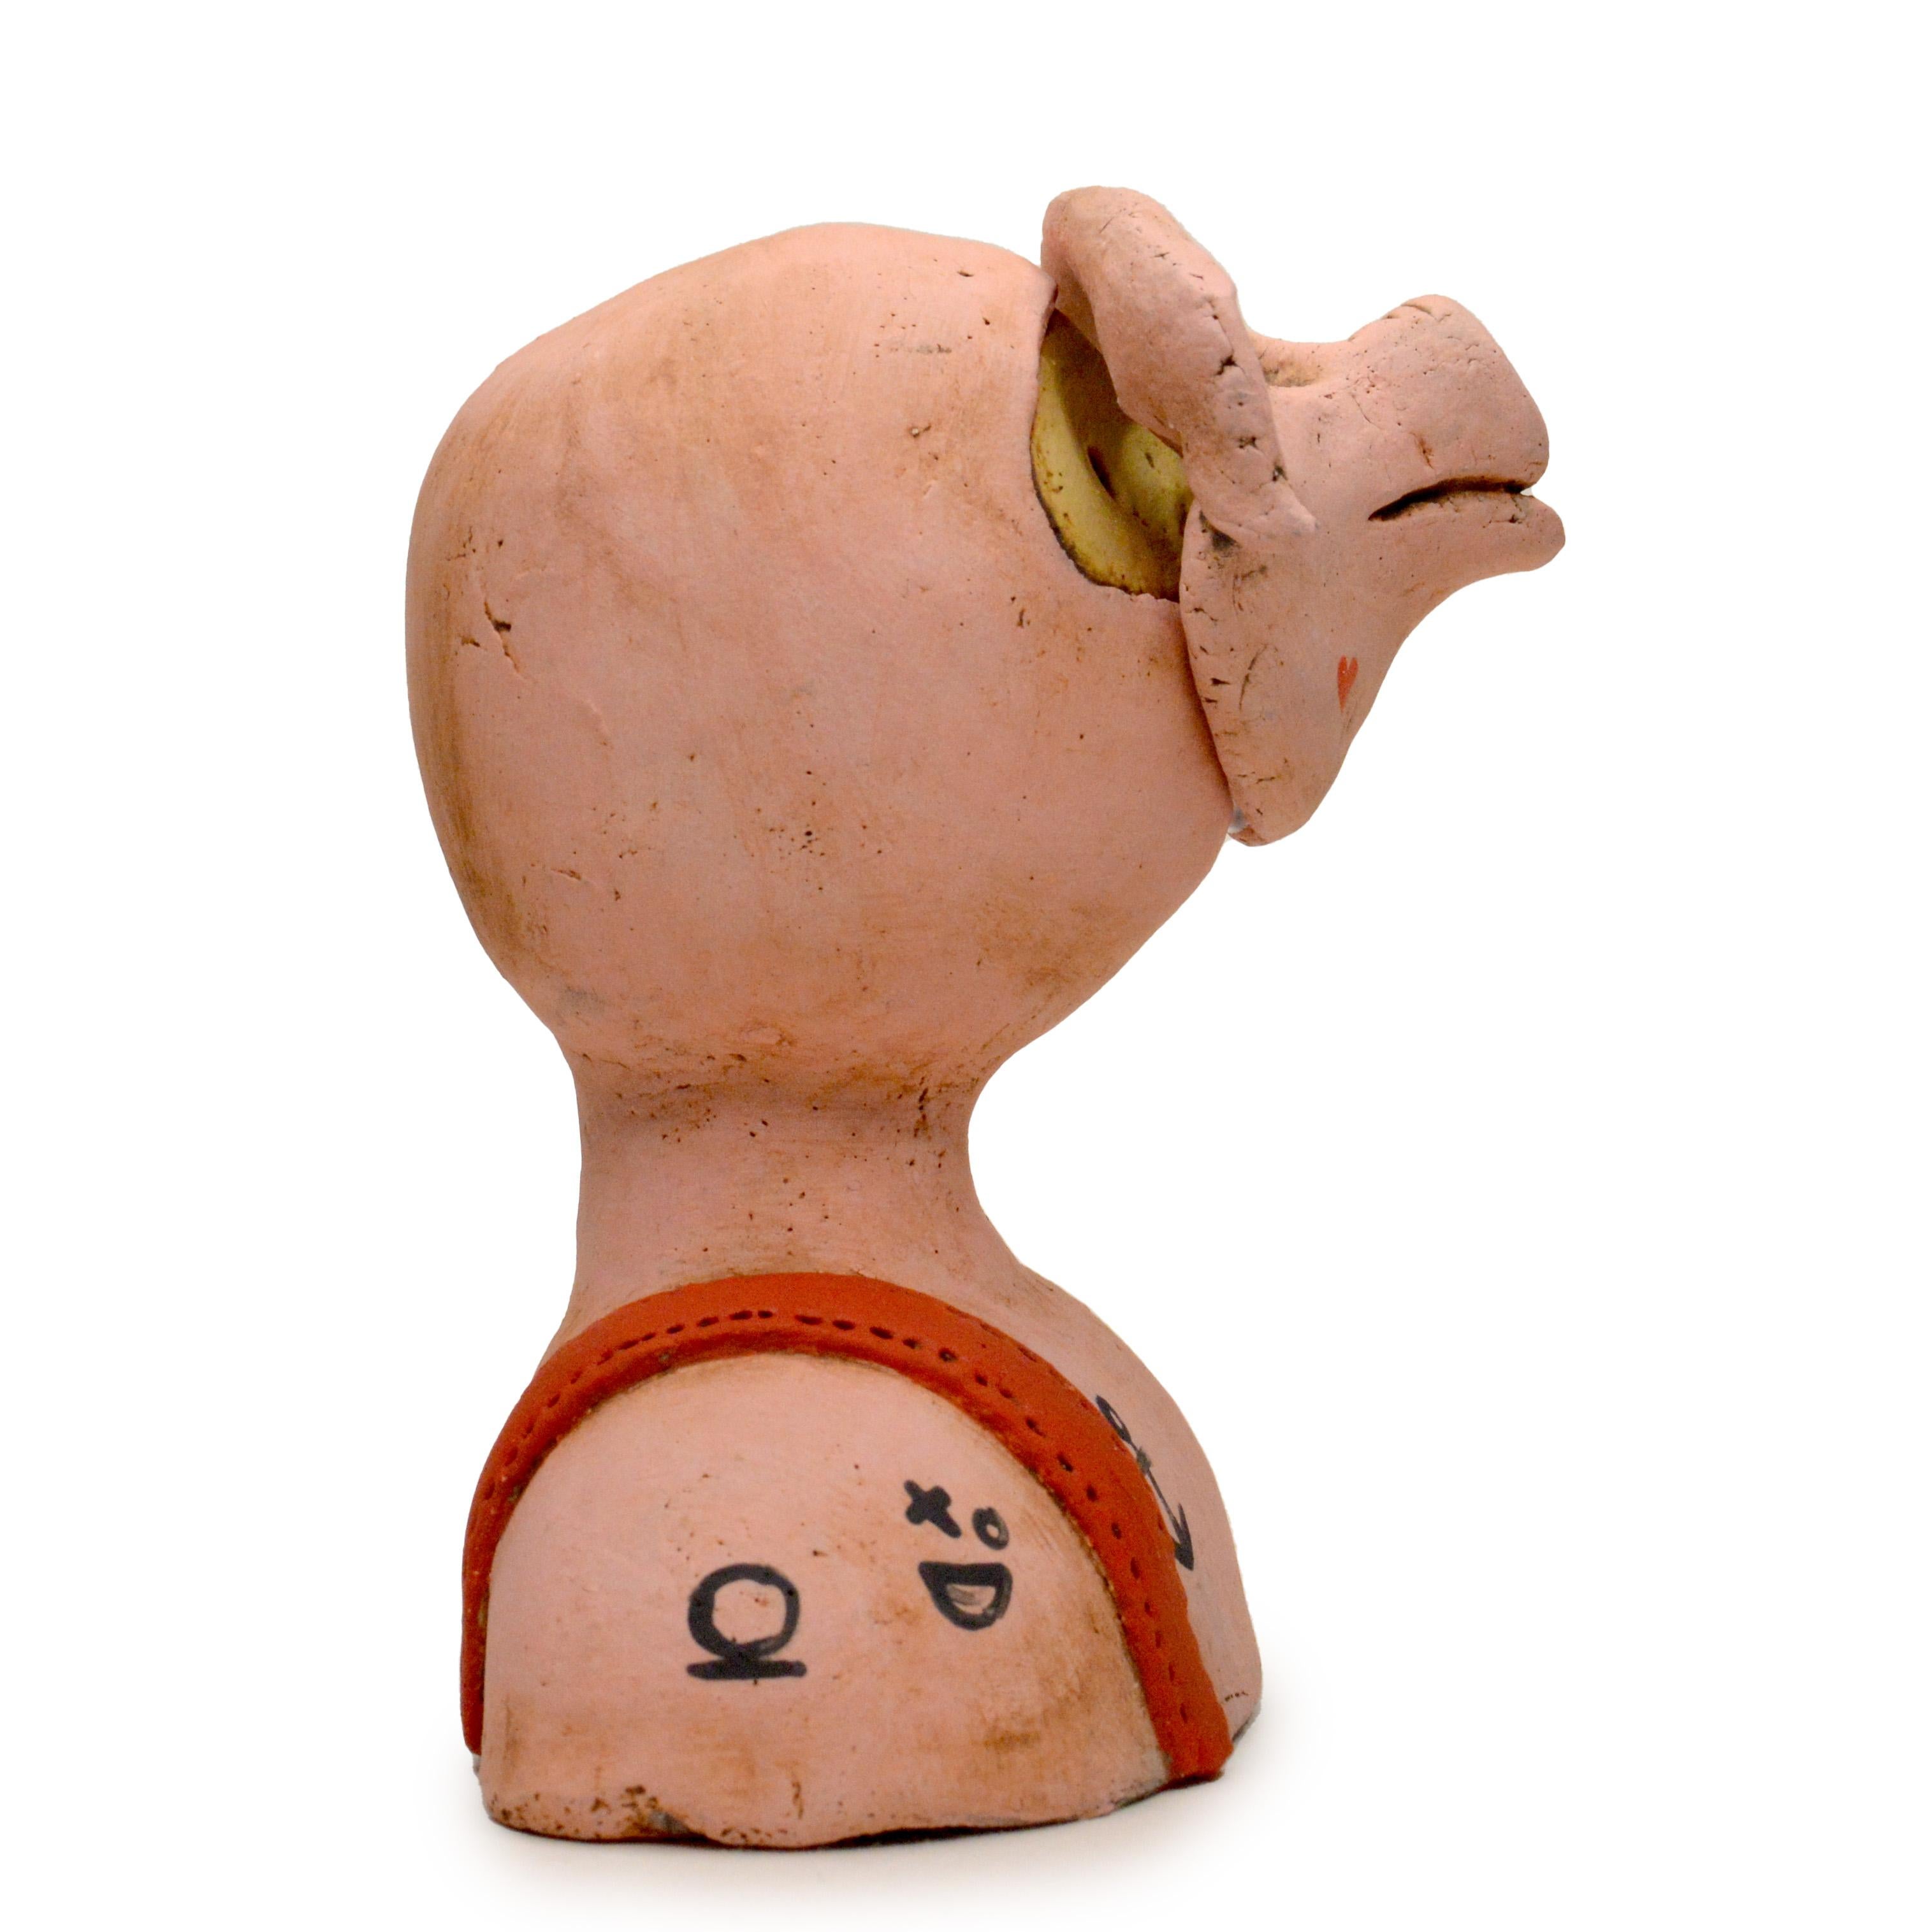 Pineco number 0021 Original Ceramic sculpture disguised as tattooed pig representing: luck, overall good fortune, wealth, honesty, general prosperity. 

Meet a variety of characters with distinct masks and postures. These sculptures are fascinating